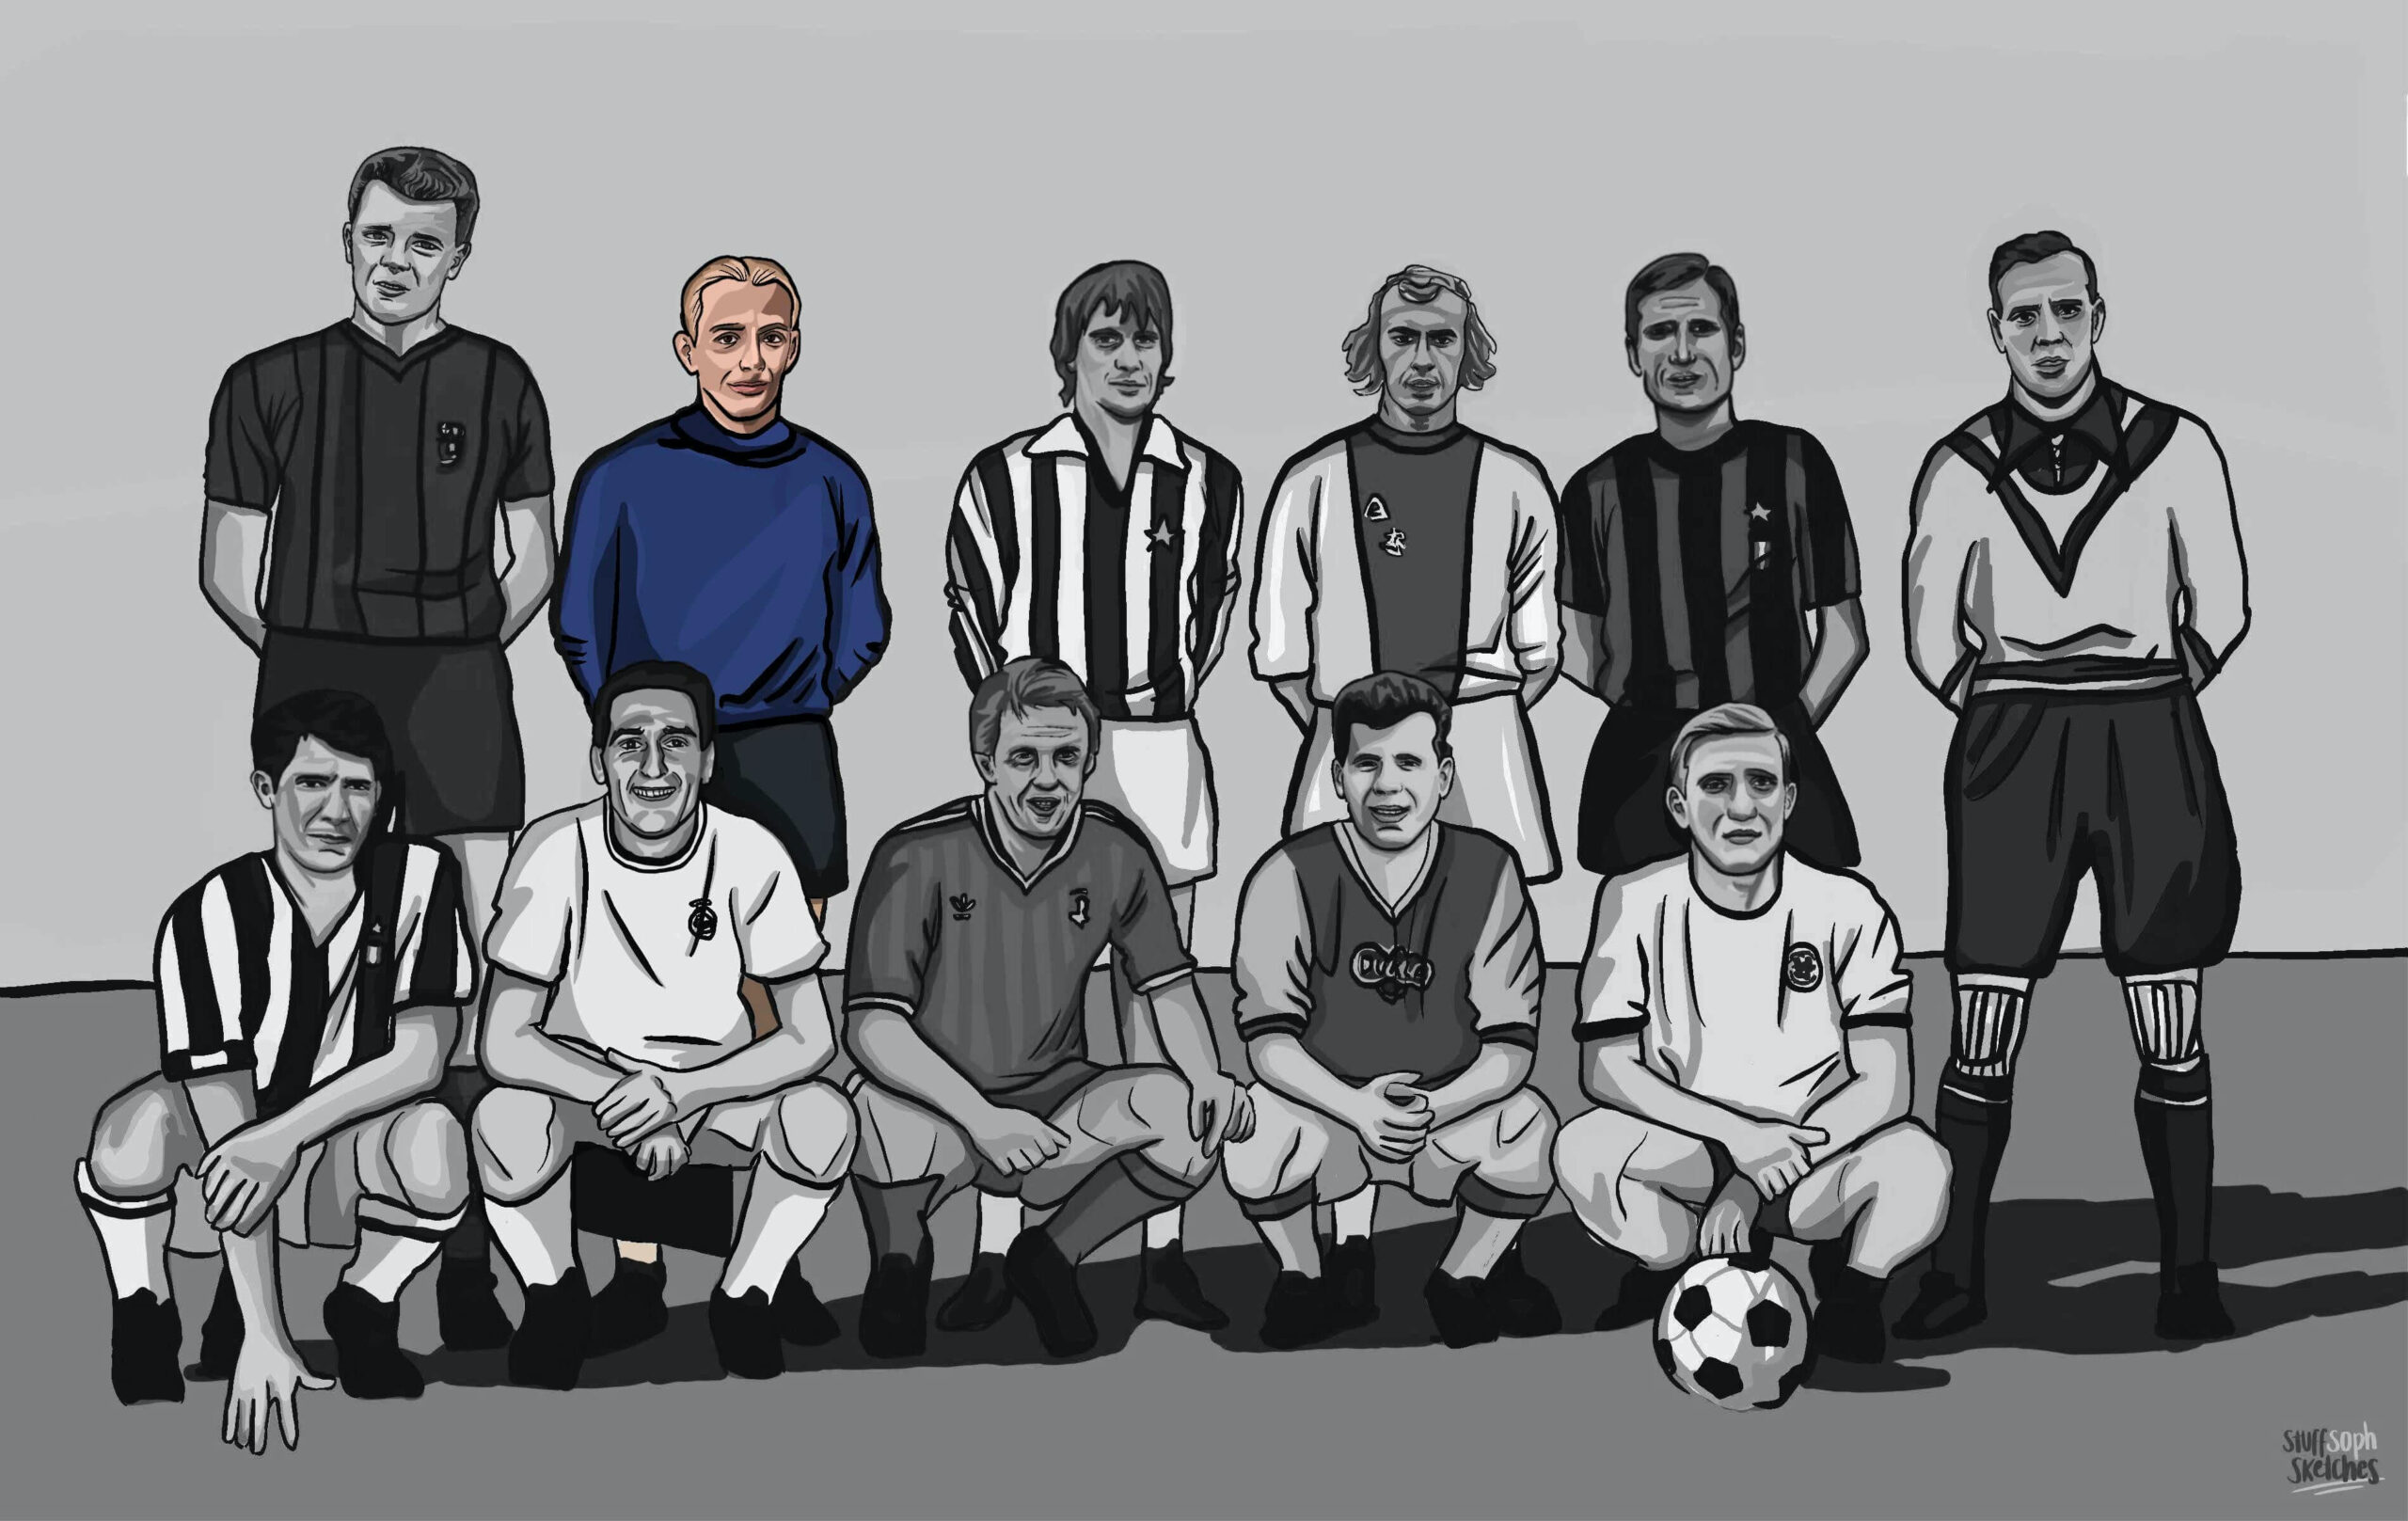 Matthais Sindelar in colour, amongst the forgotten eleven lineup in black and white